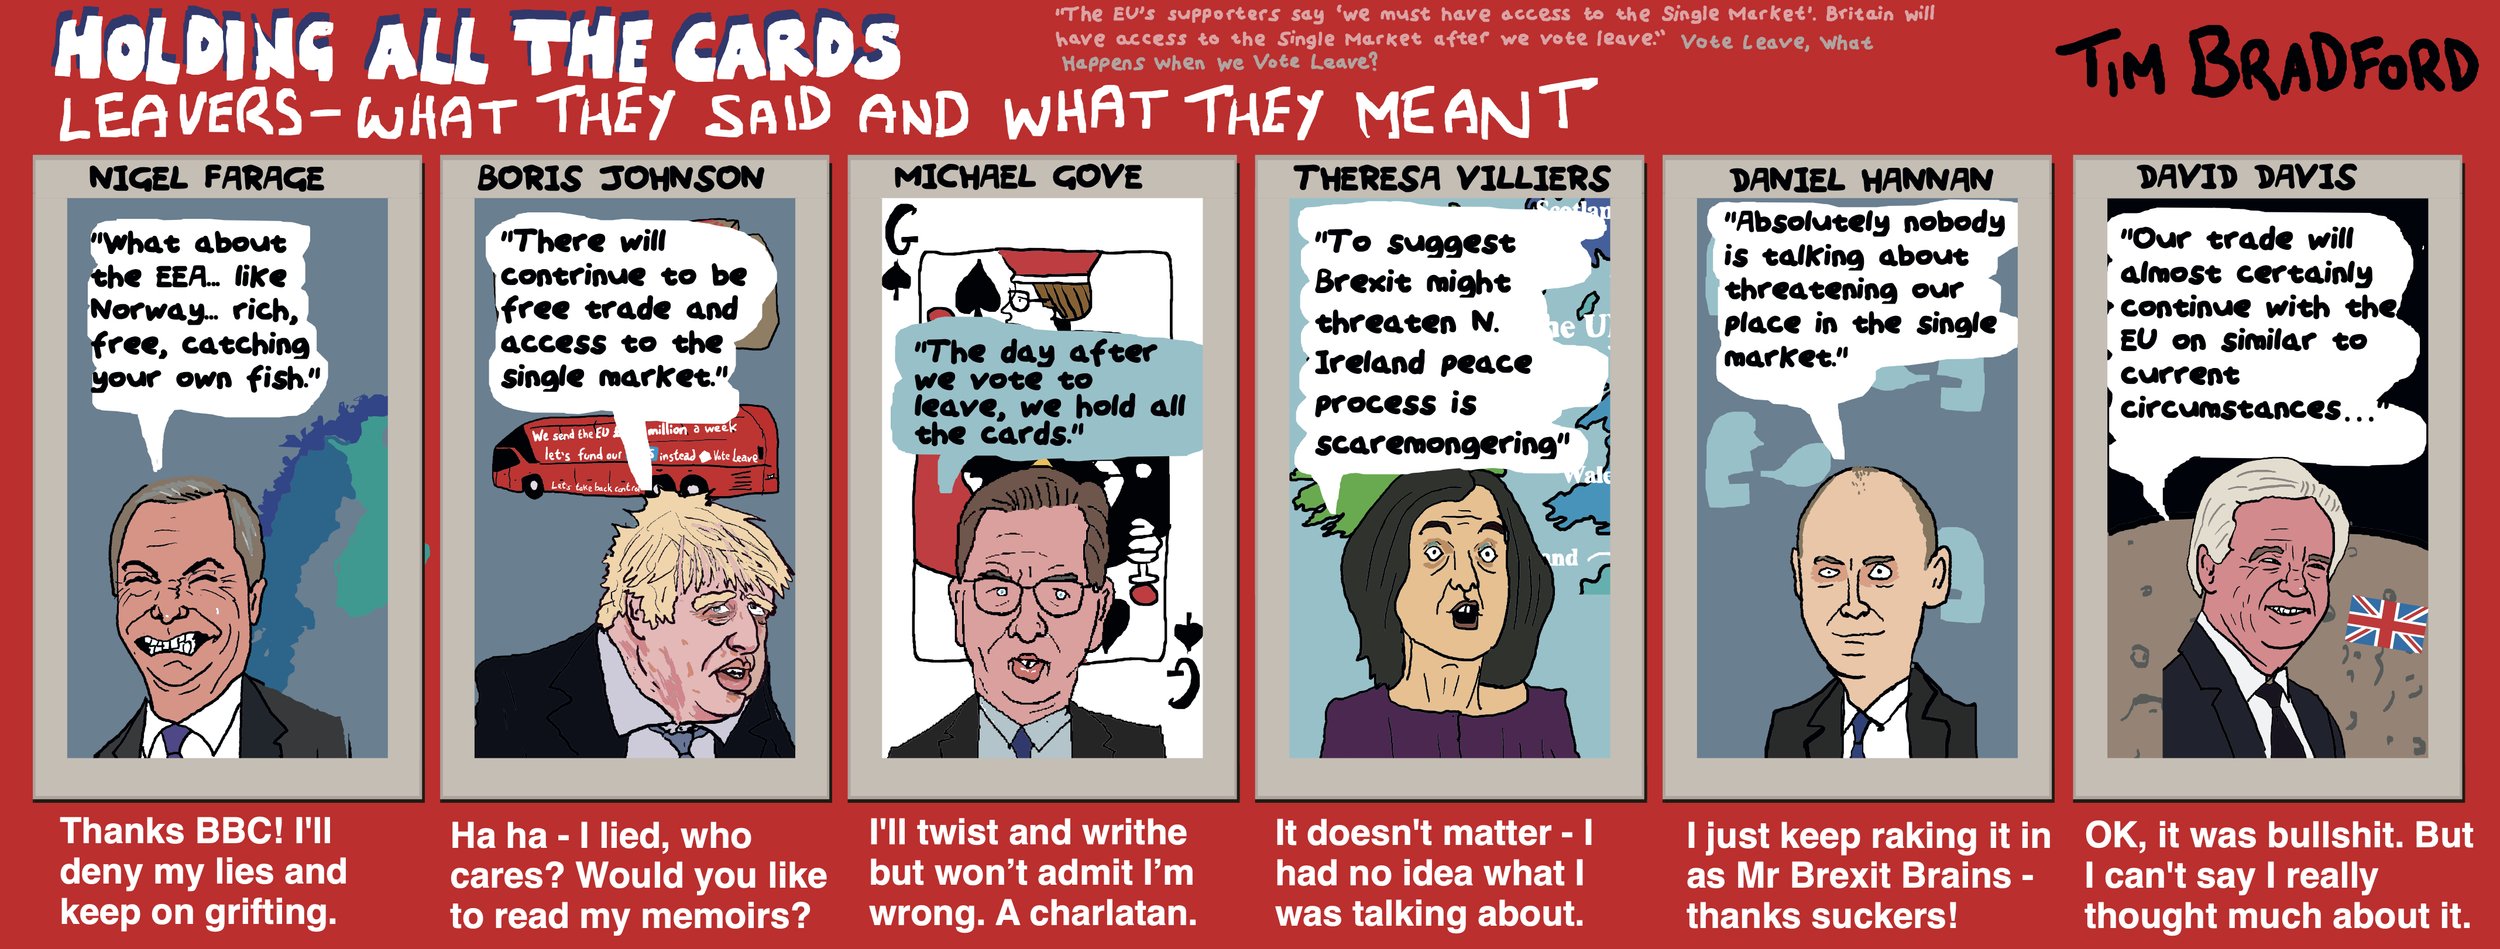 Leavers: what they said, and what they meant - 28/11/2022